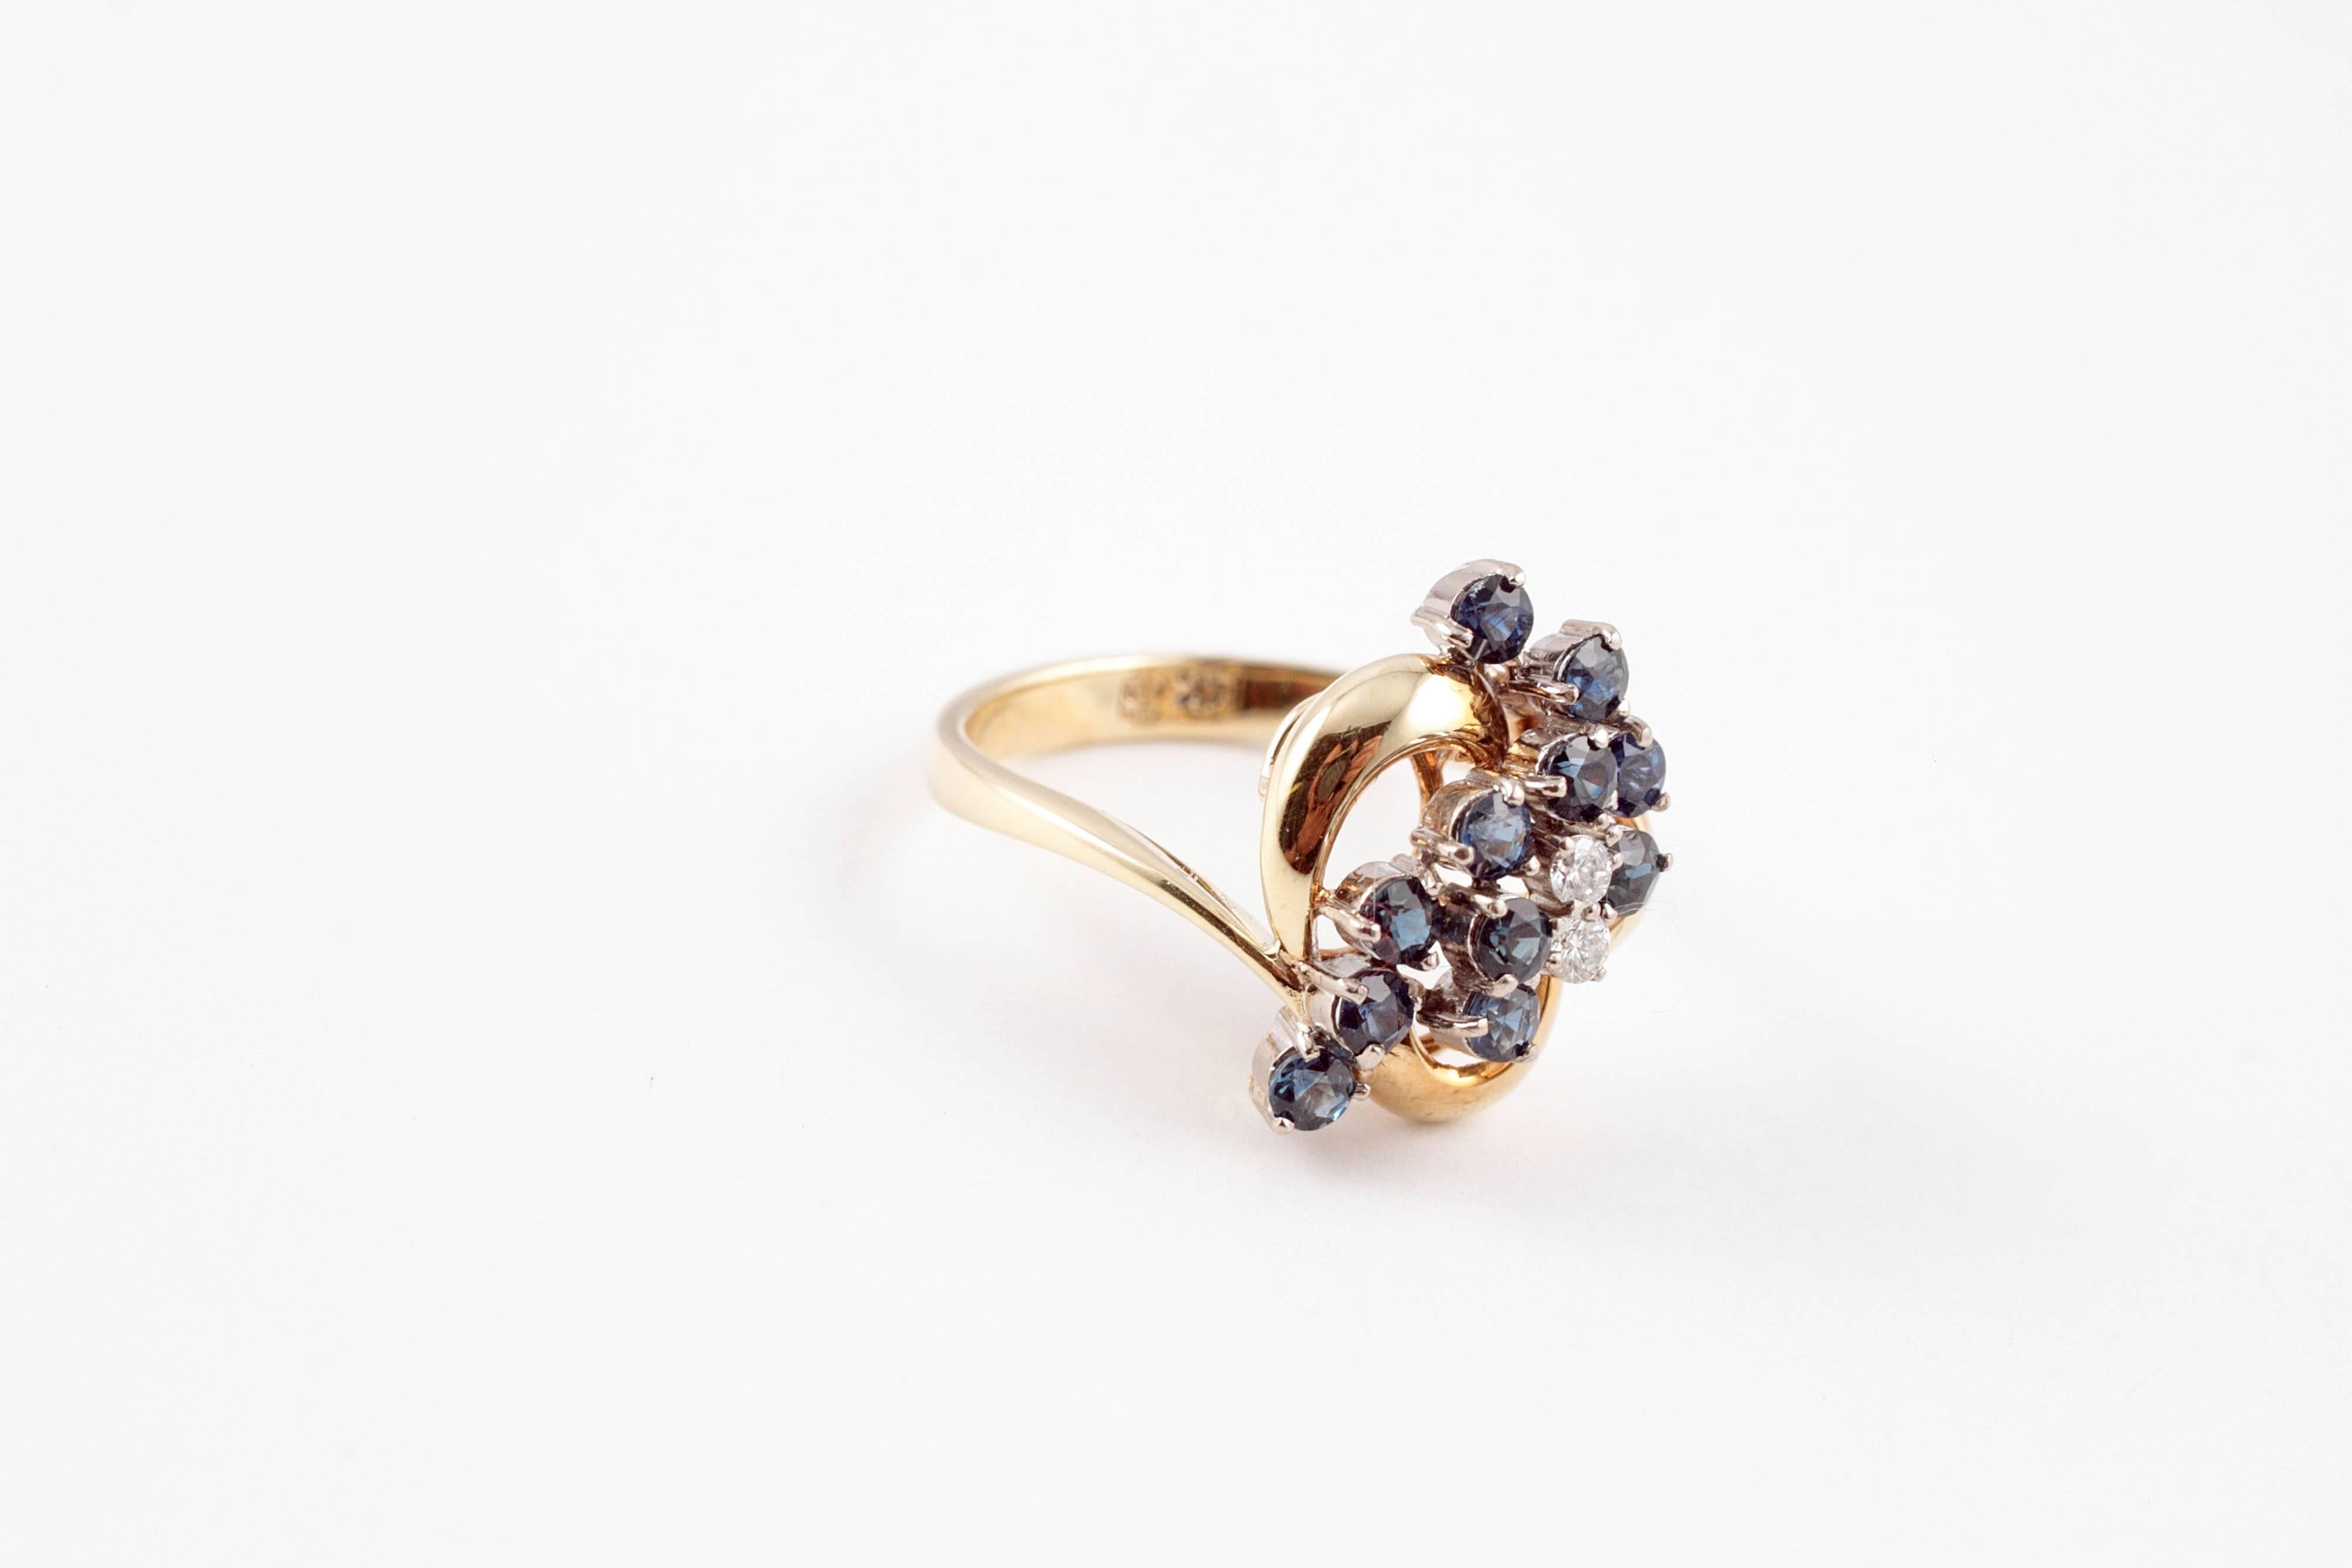 Blue sapphires dancing with diamond accents in a 14 karat yellow gold mounting.  Size 6 3/4.